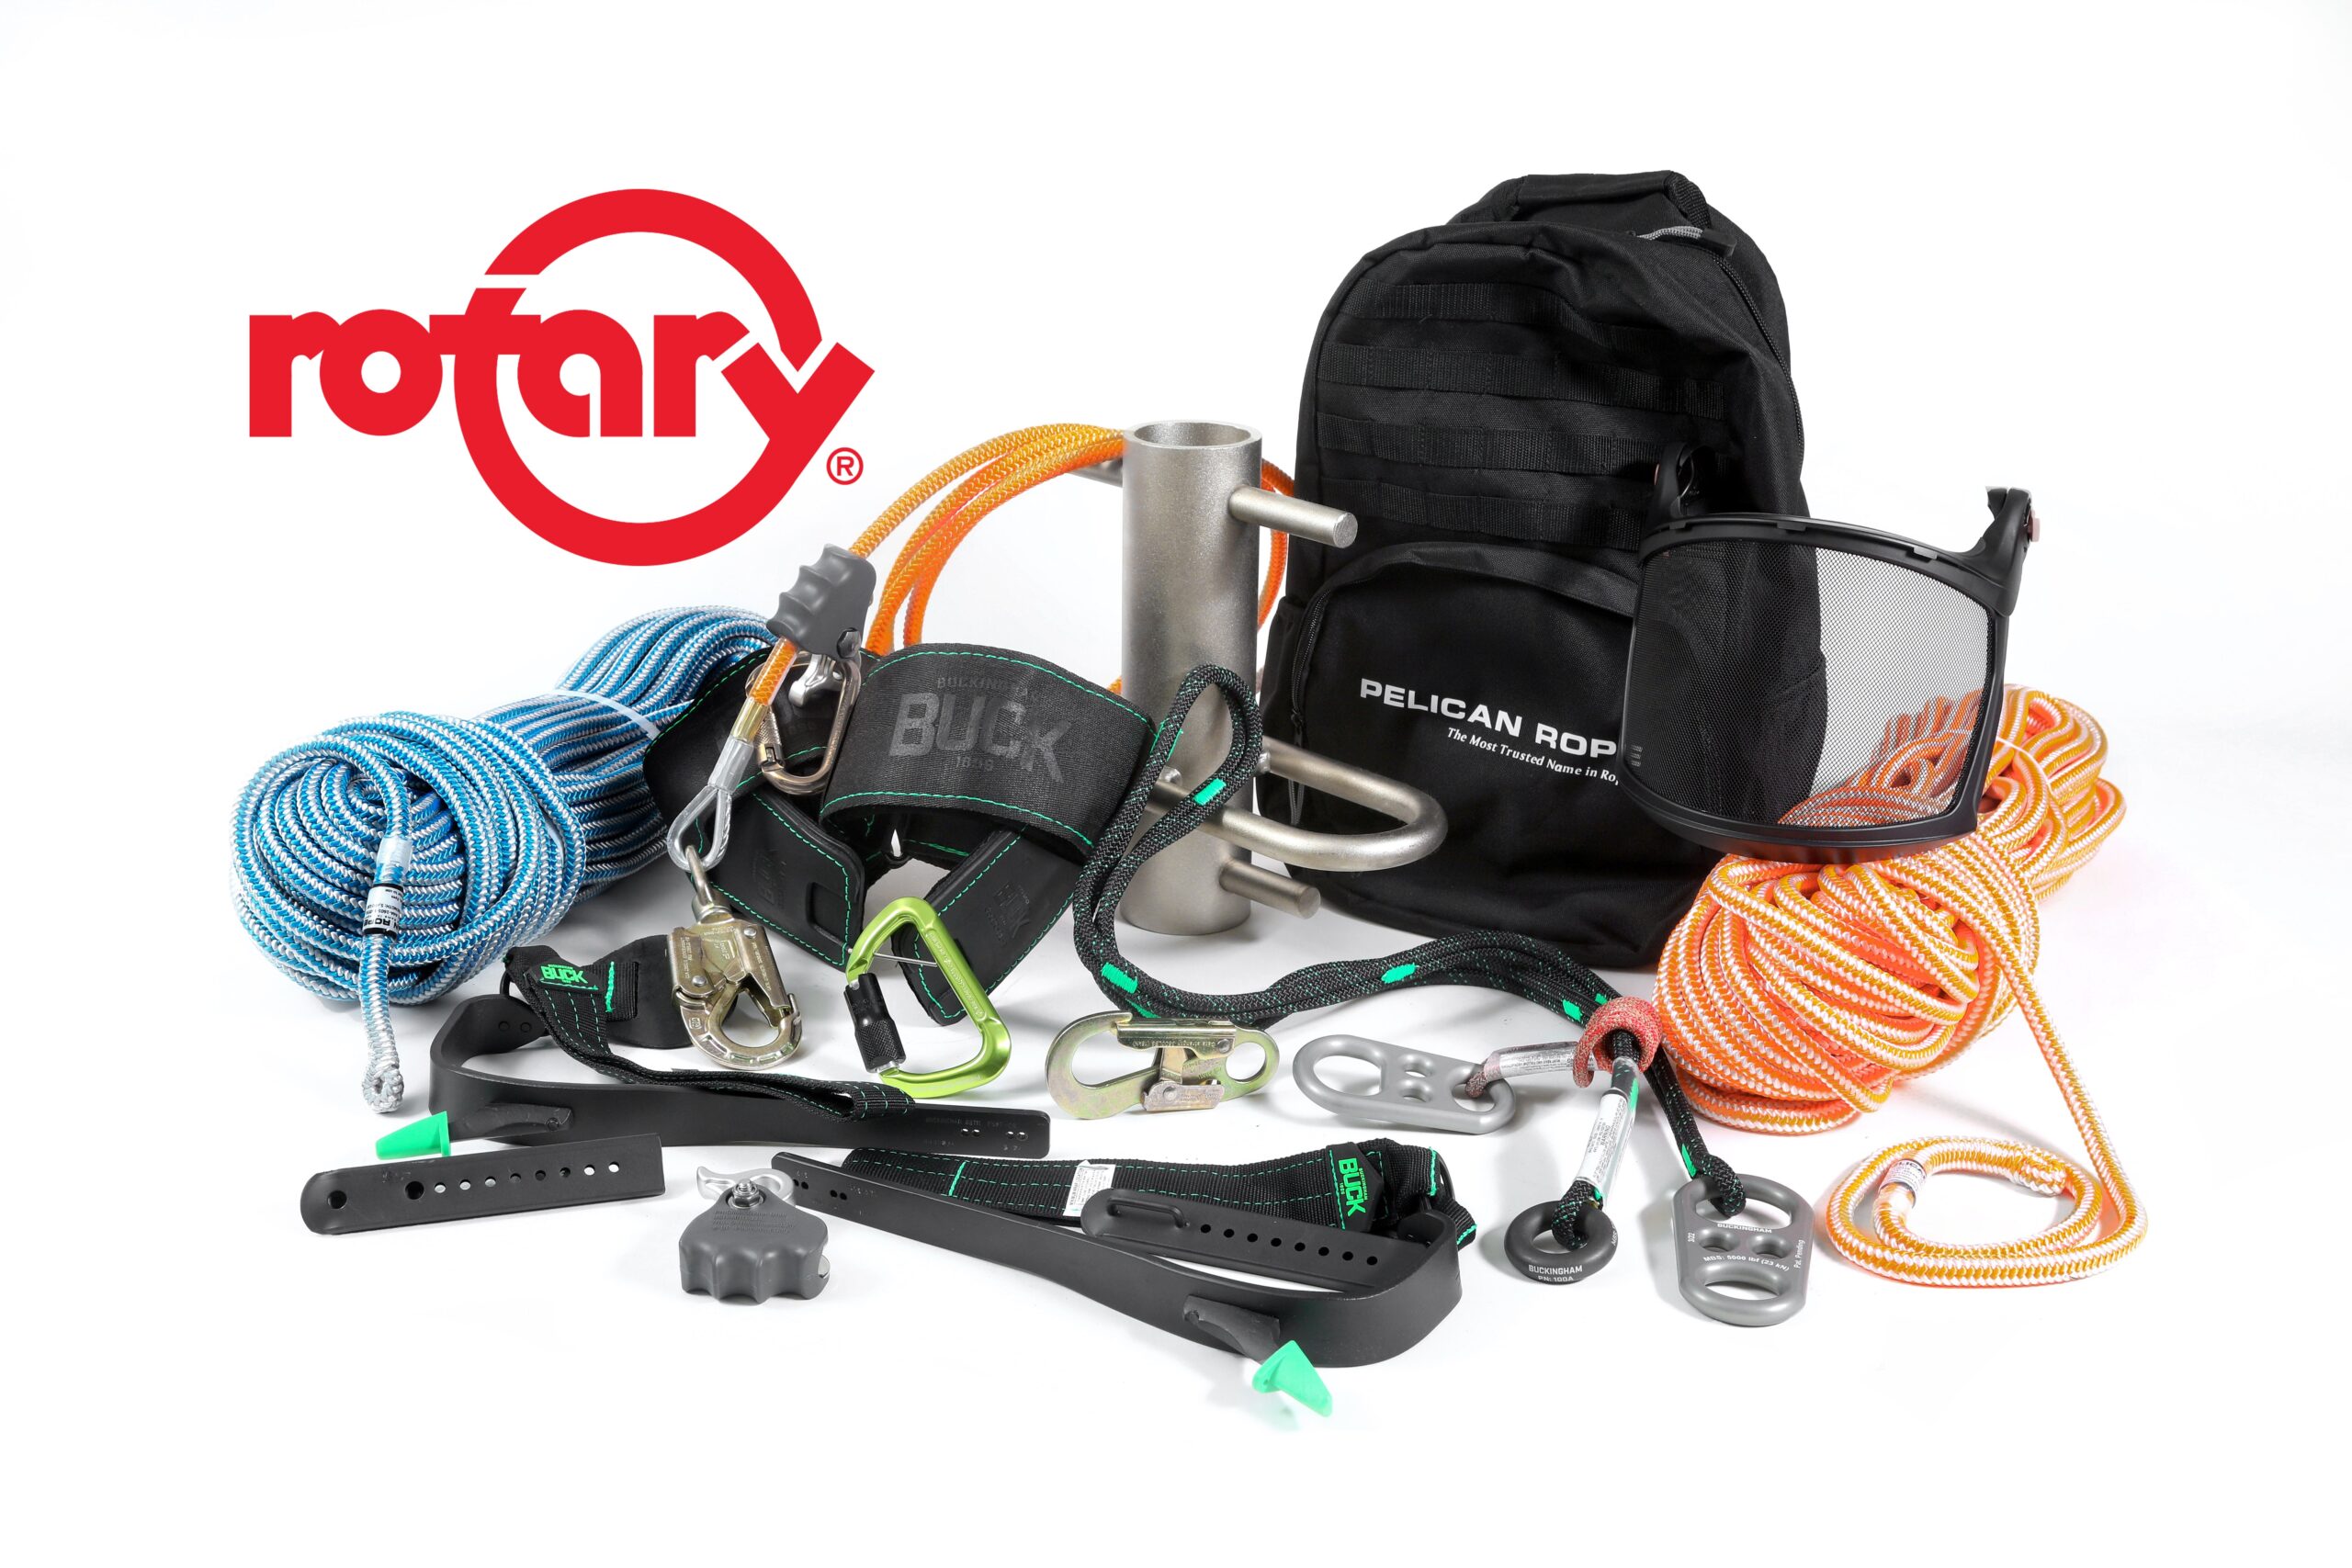 Rotary offers a full line of arborist supplies and tree climbing